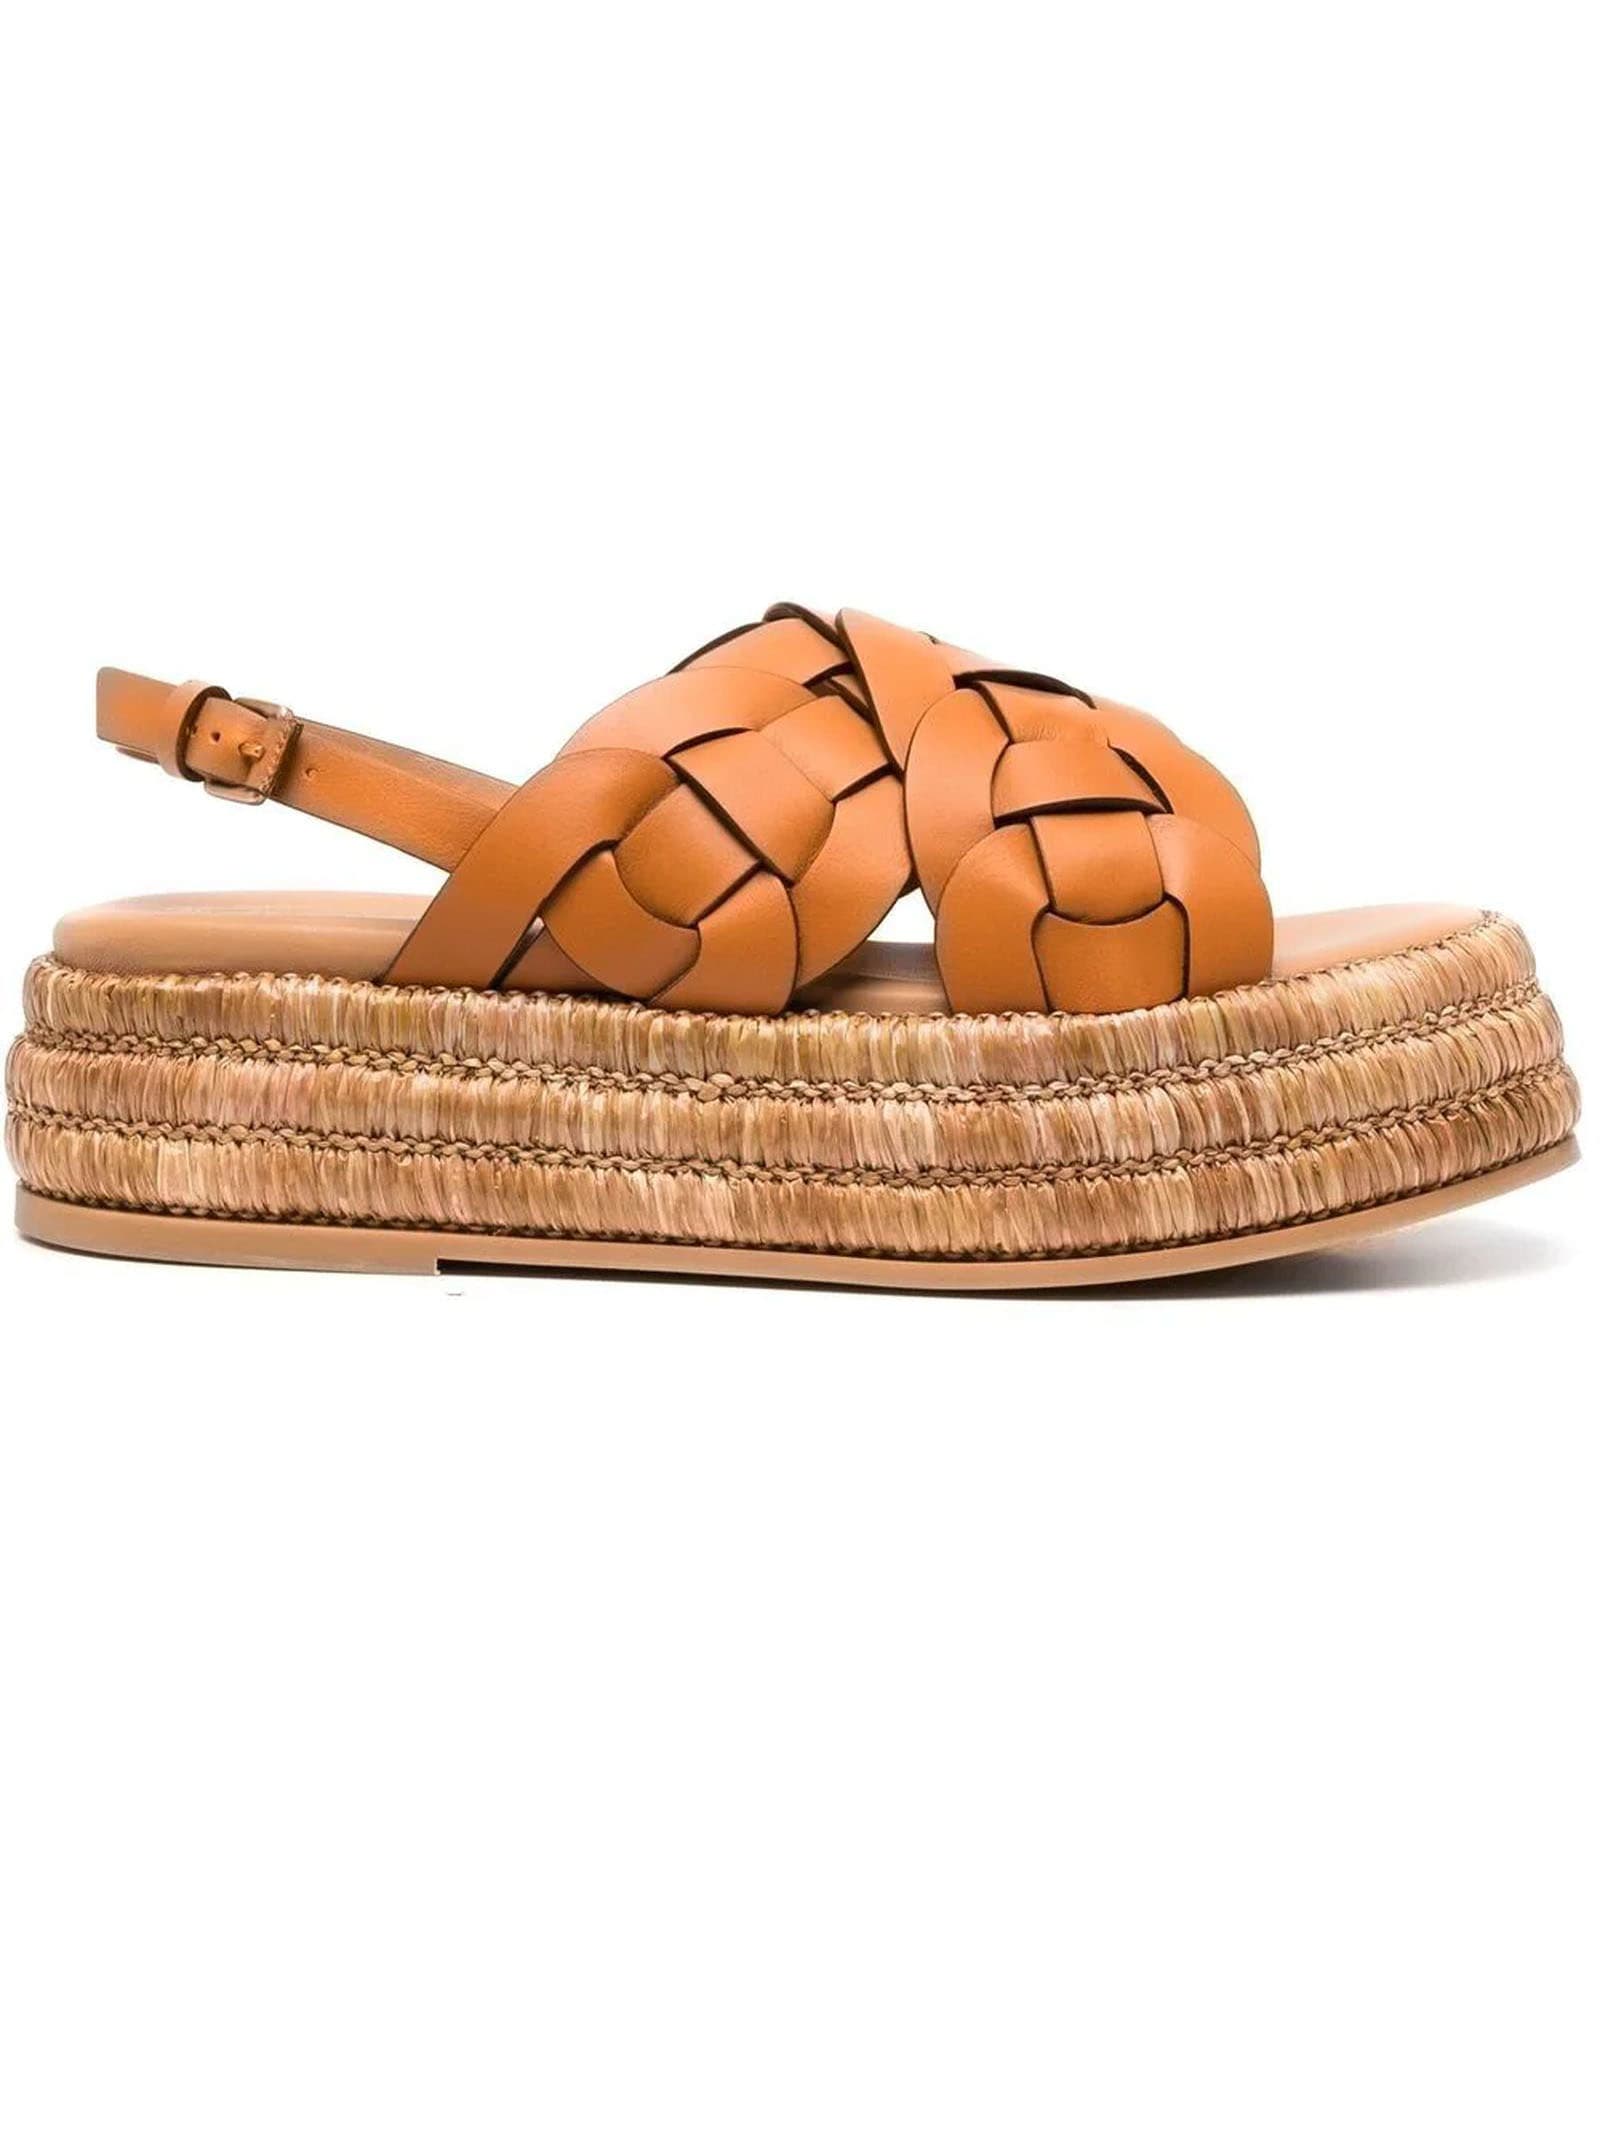 TOD'S CARAMEL BROWN CALF LEATHER SANDALS